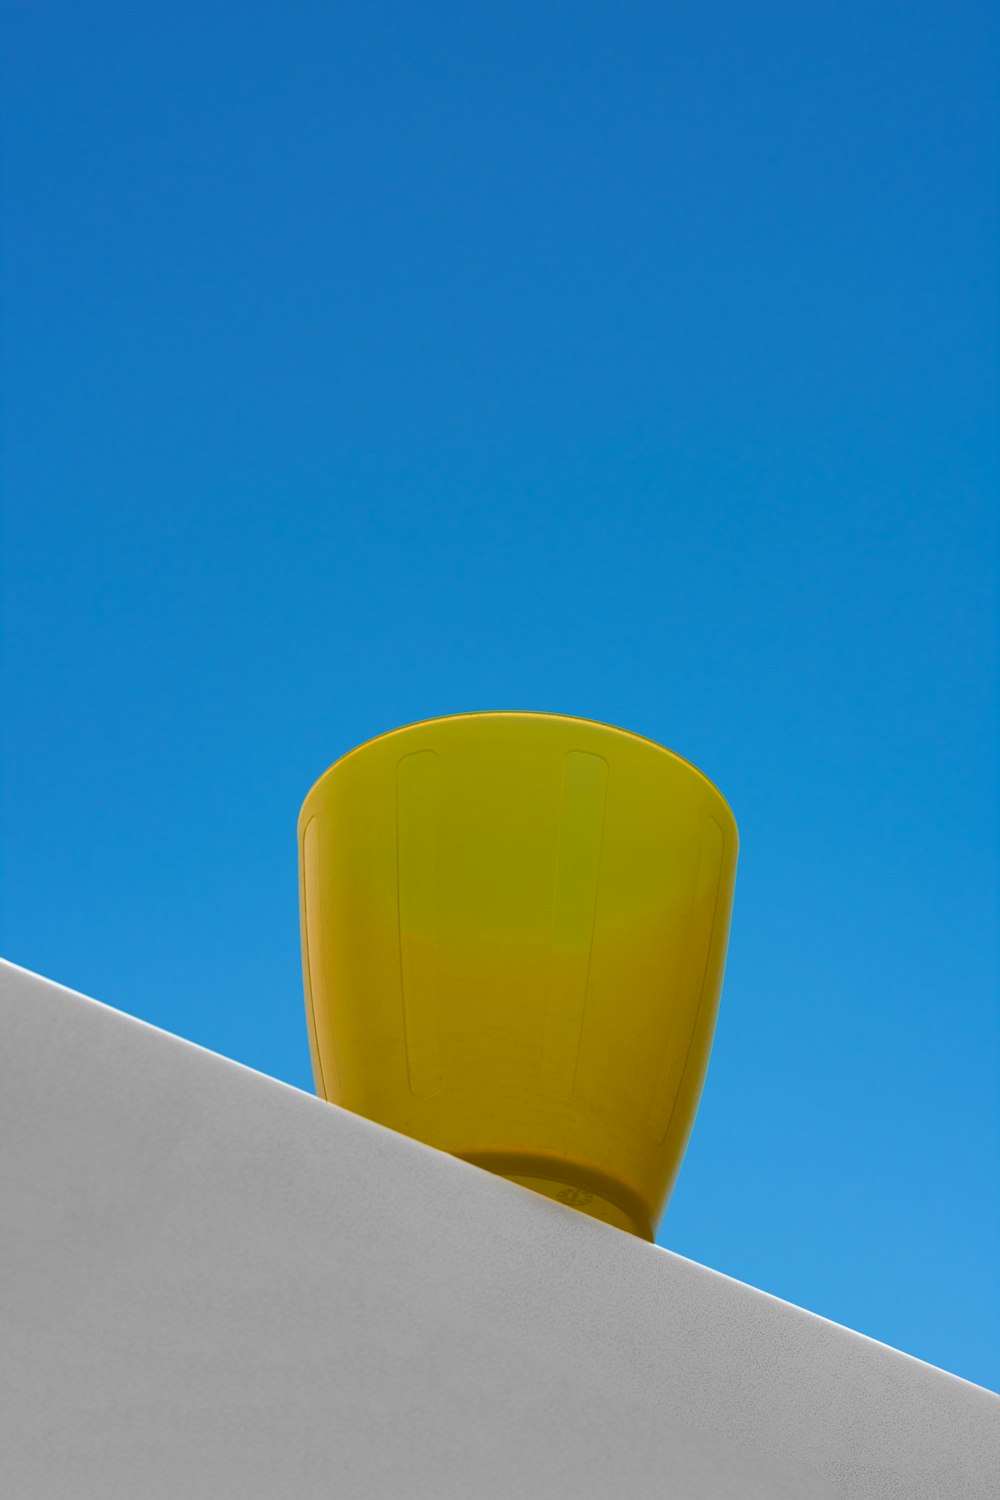 a yellow ball on a white surface